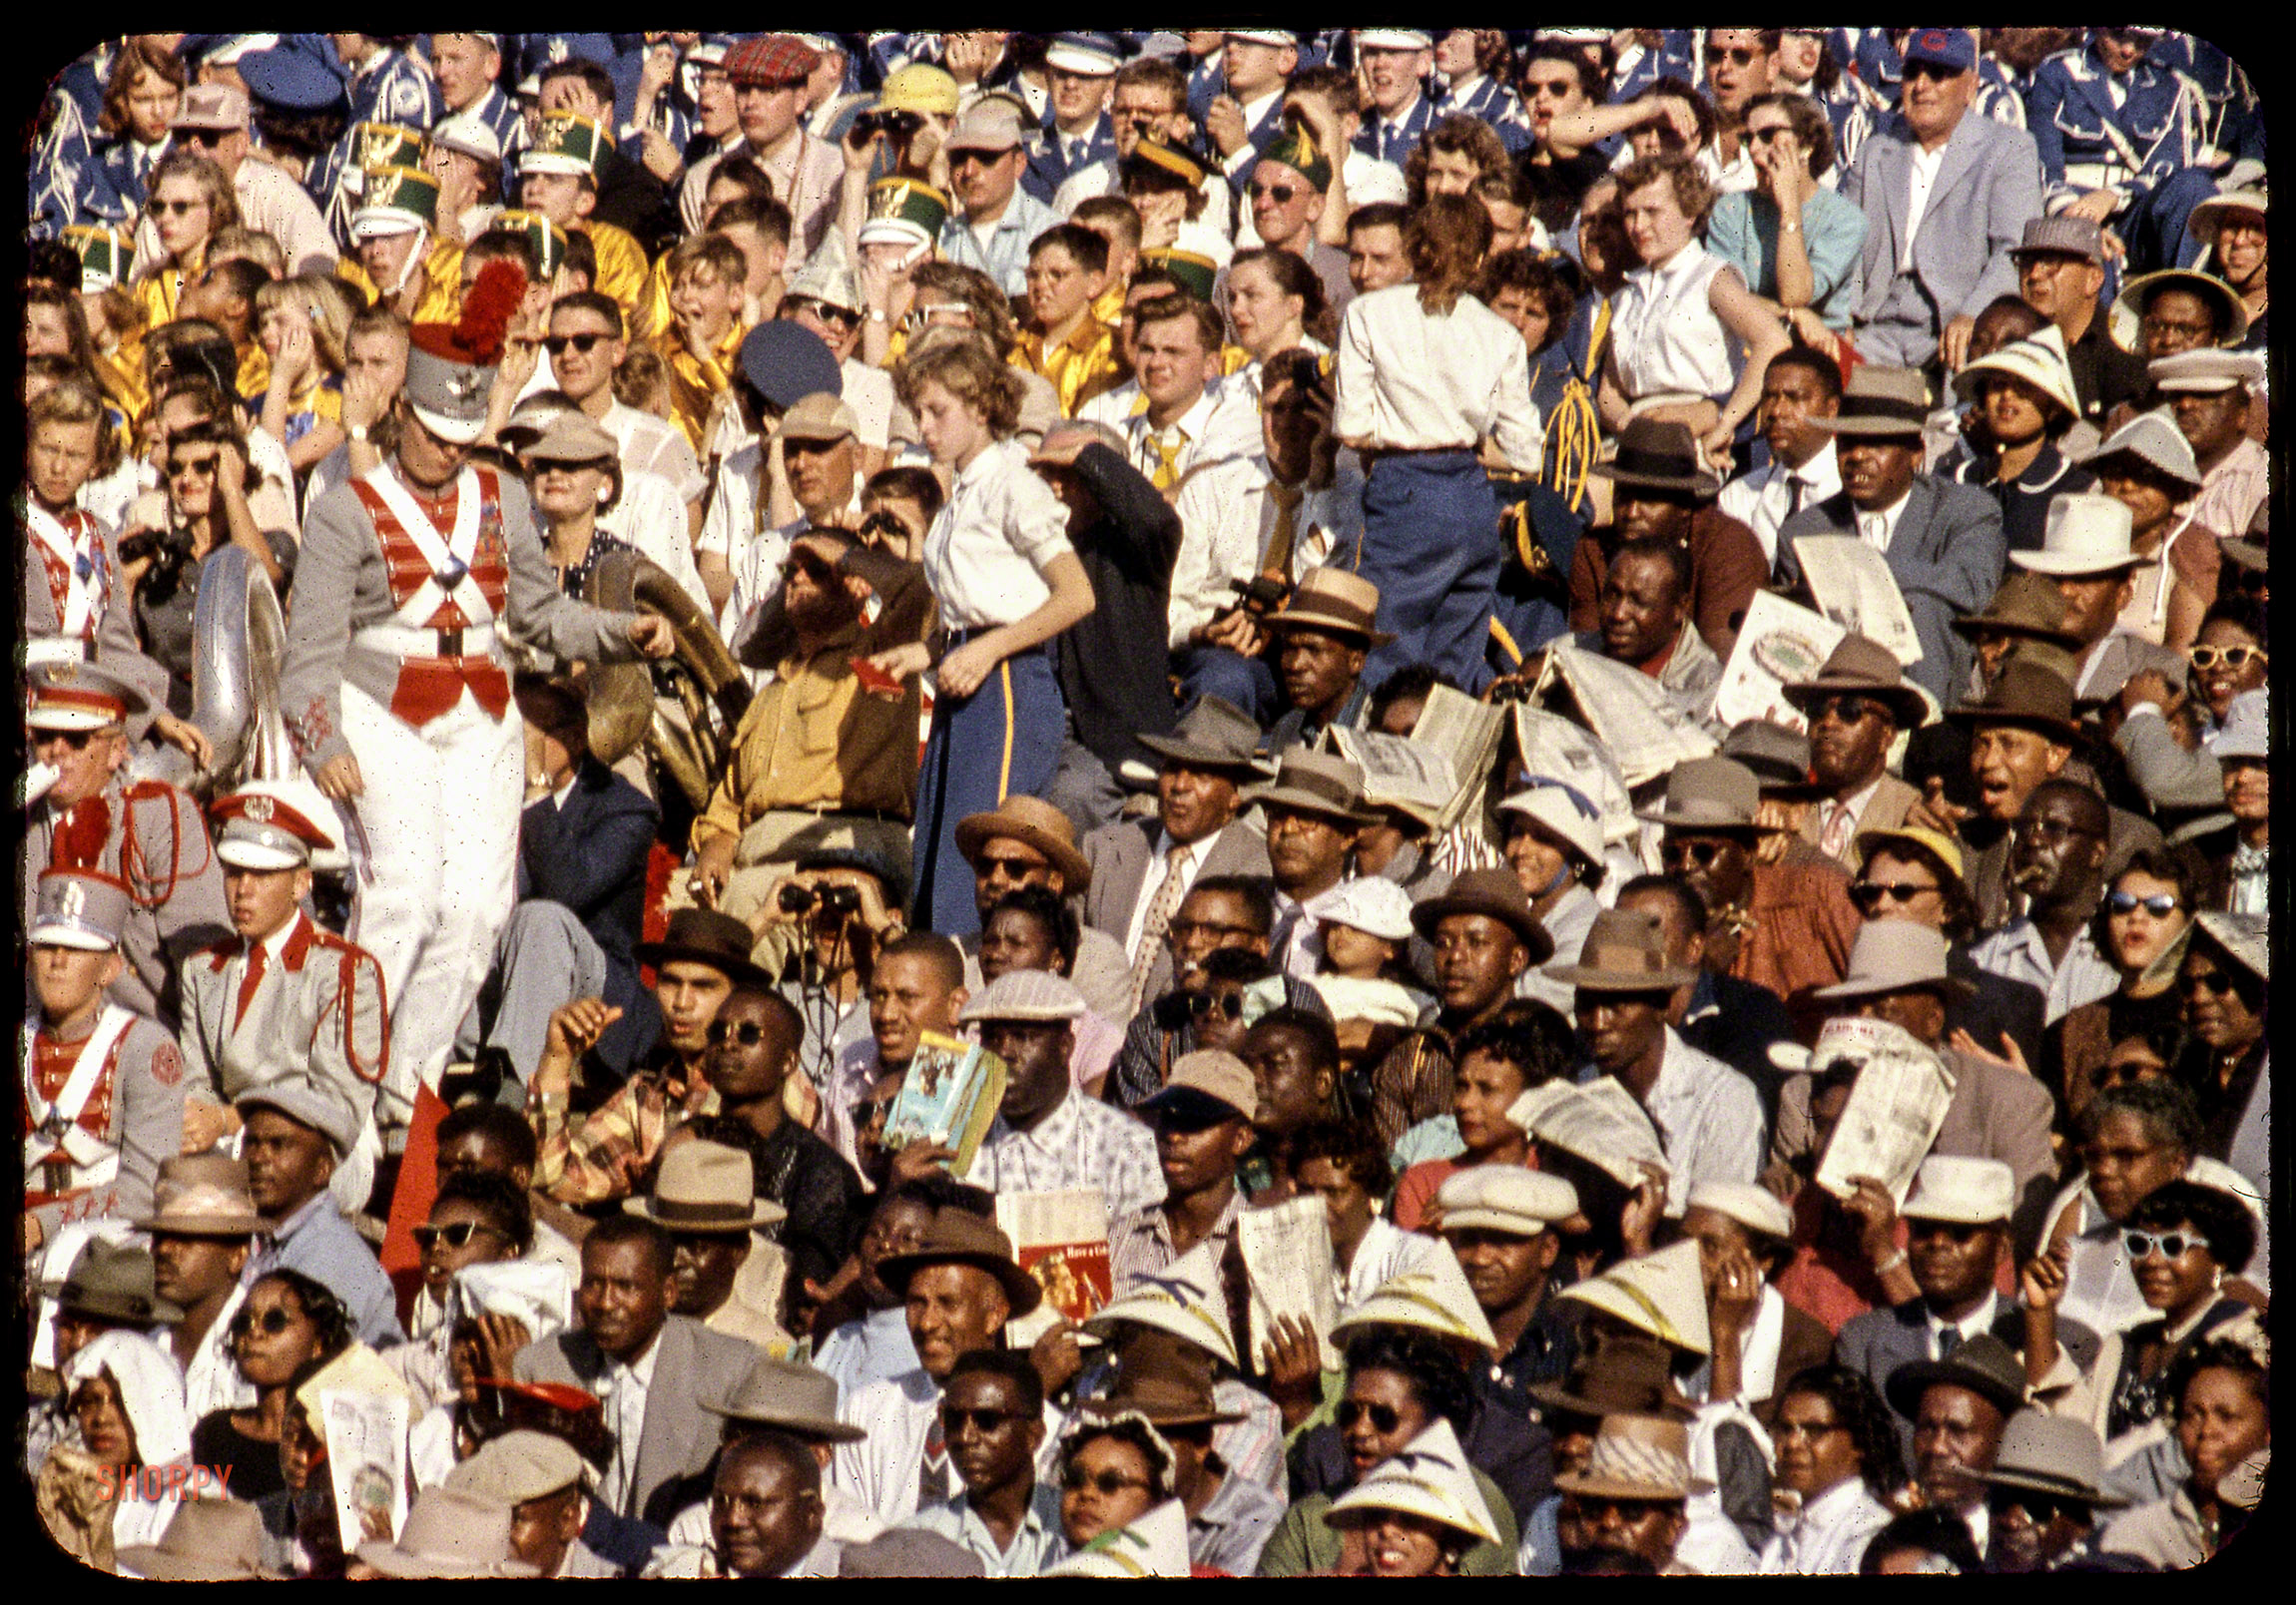 December 1955. "Football game in Florida." Kodachrome transparency by Phillip Harrington for the Look magazine assignments "How It Looks From the South," "Florida's Prophets of Boom" and "What Is Florida?" View full size.